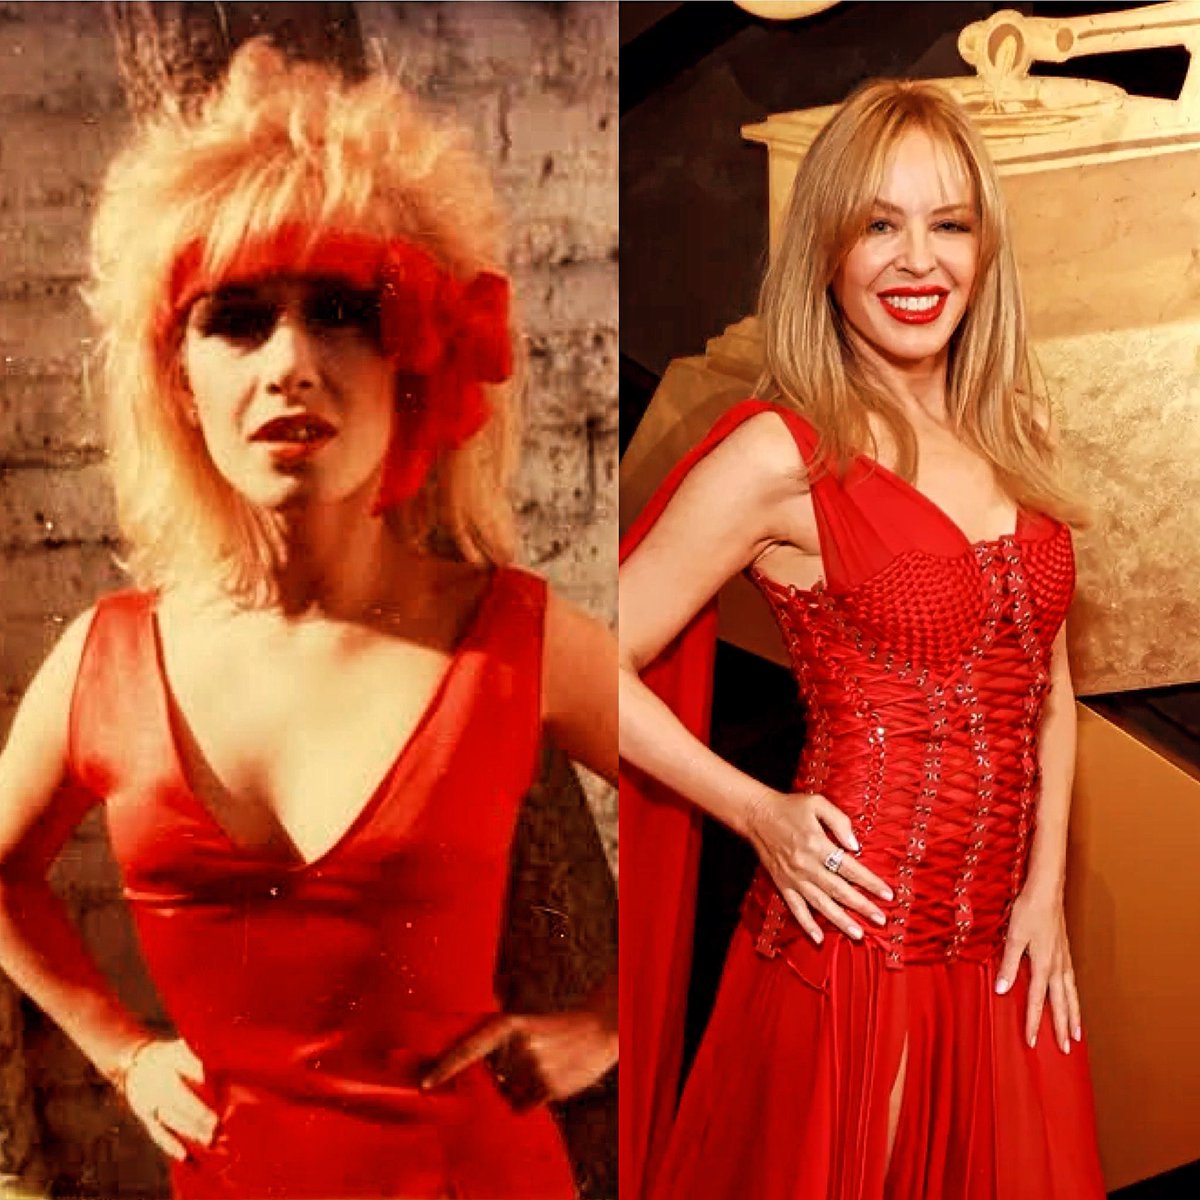 1987 - the same year I Should Be So Lucky and O L’amour were released 💋 @kylieminogue #KylieMinogue #GRAMMYs #PadamPadam